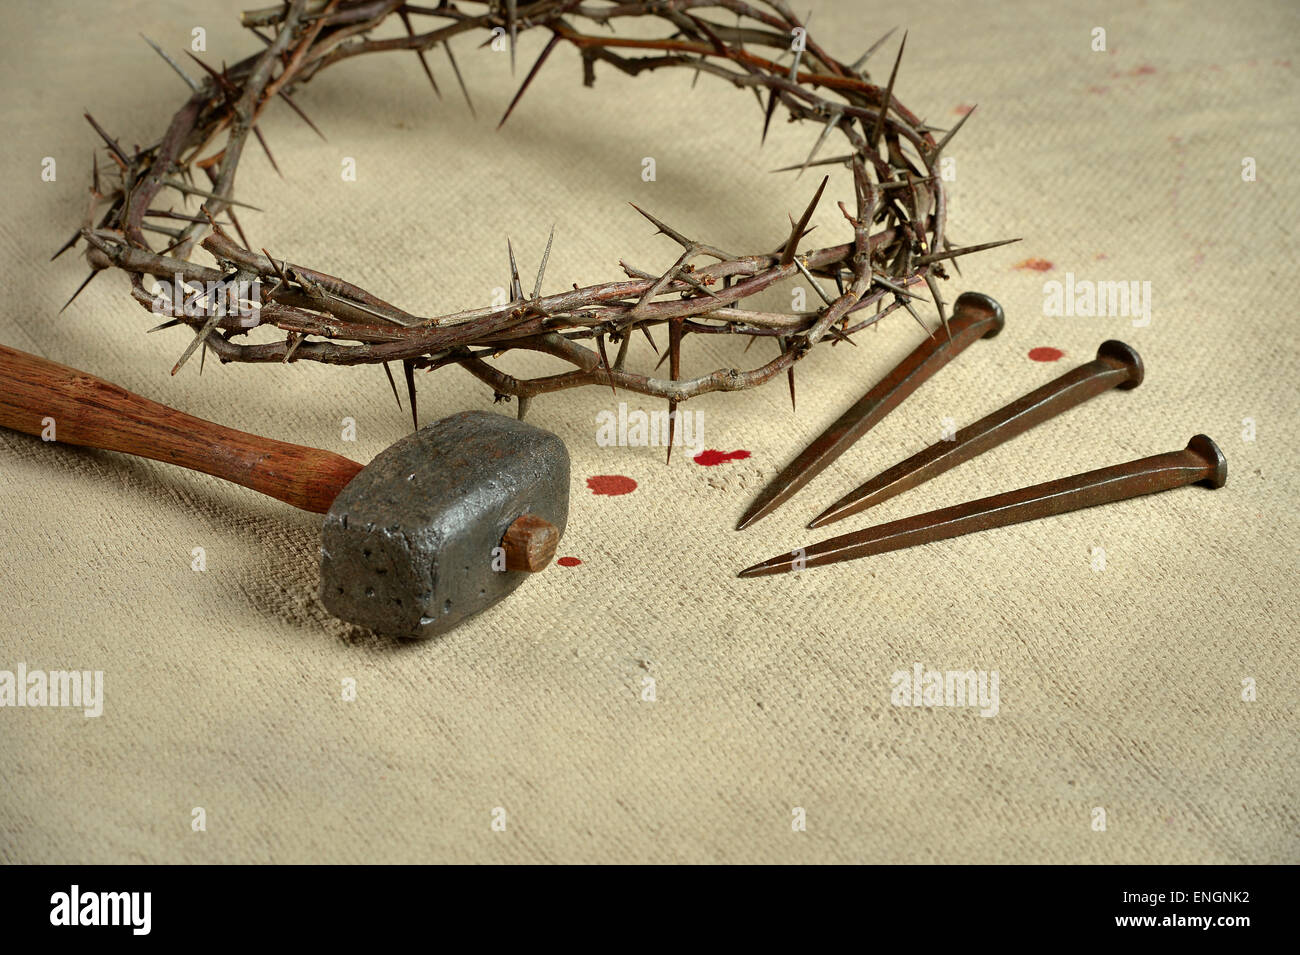 Christian symbols of the crucifixion with crown of thorns, nails and mallet on distressed cloth Stock Photo